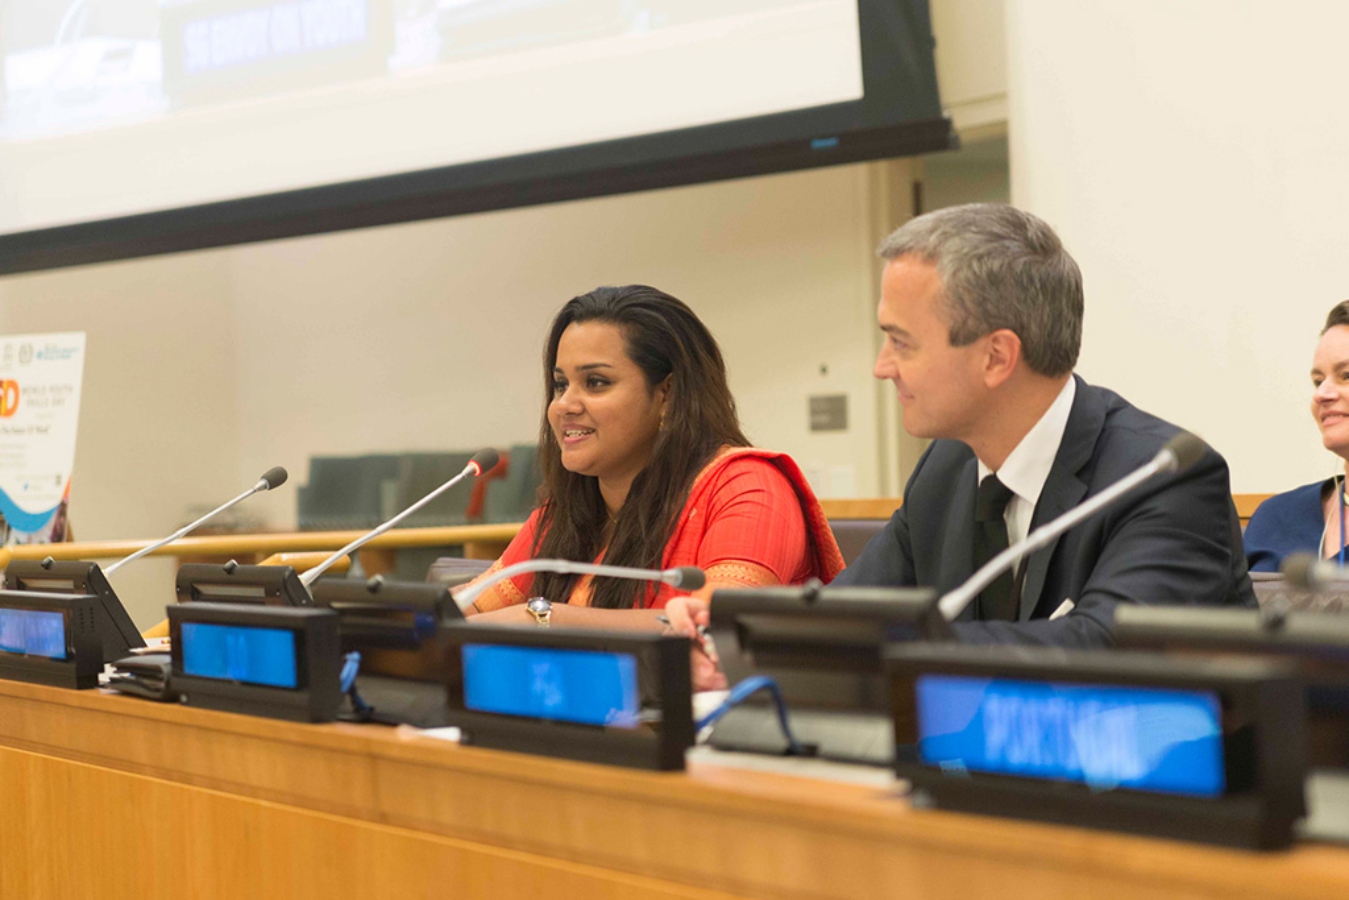 Jess Walker Jayathma Wickramanayake delivers her first public remarks as Youth Envoy at the commemoration of World Youth Skills Day at UN Headquarters.